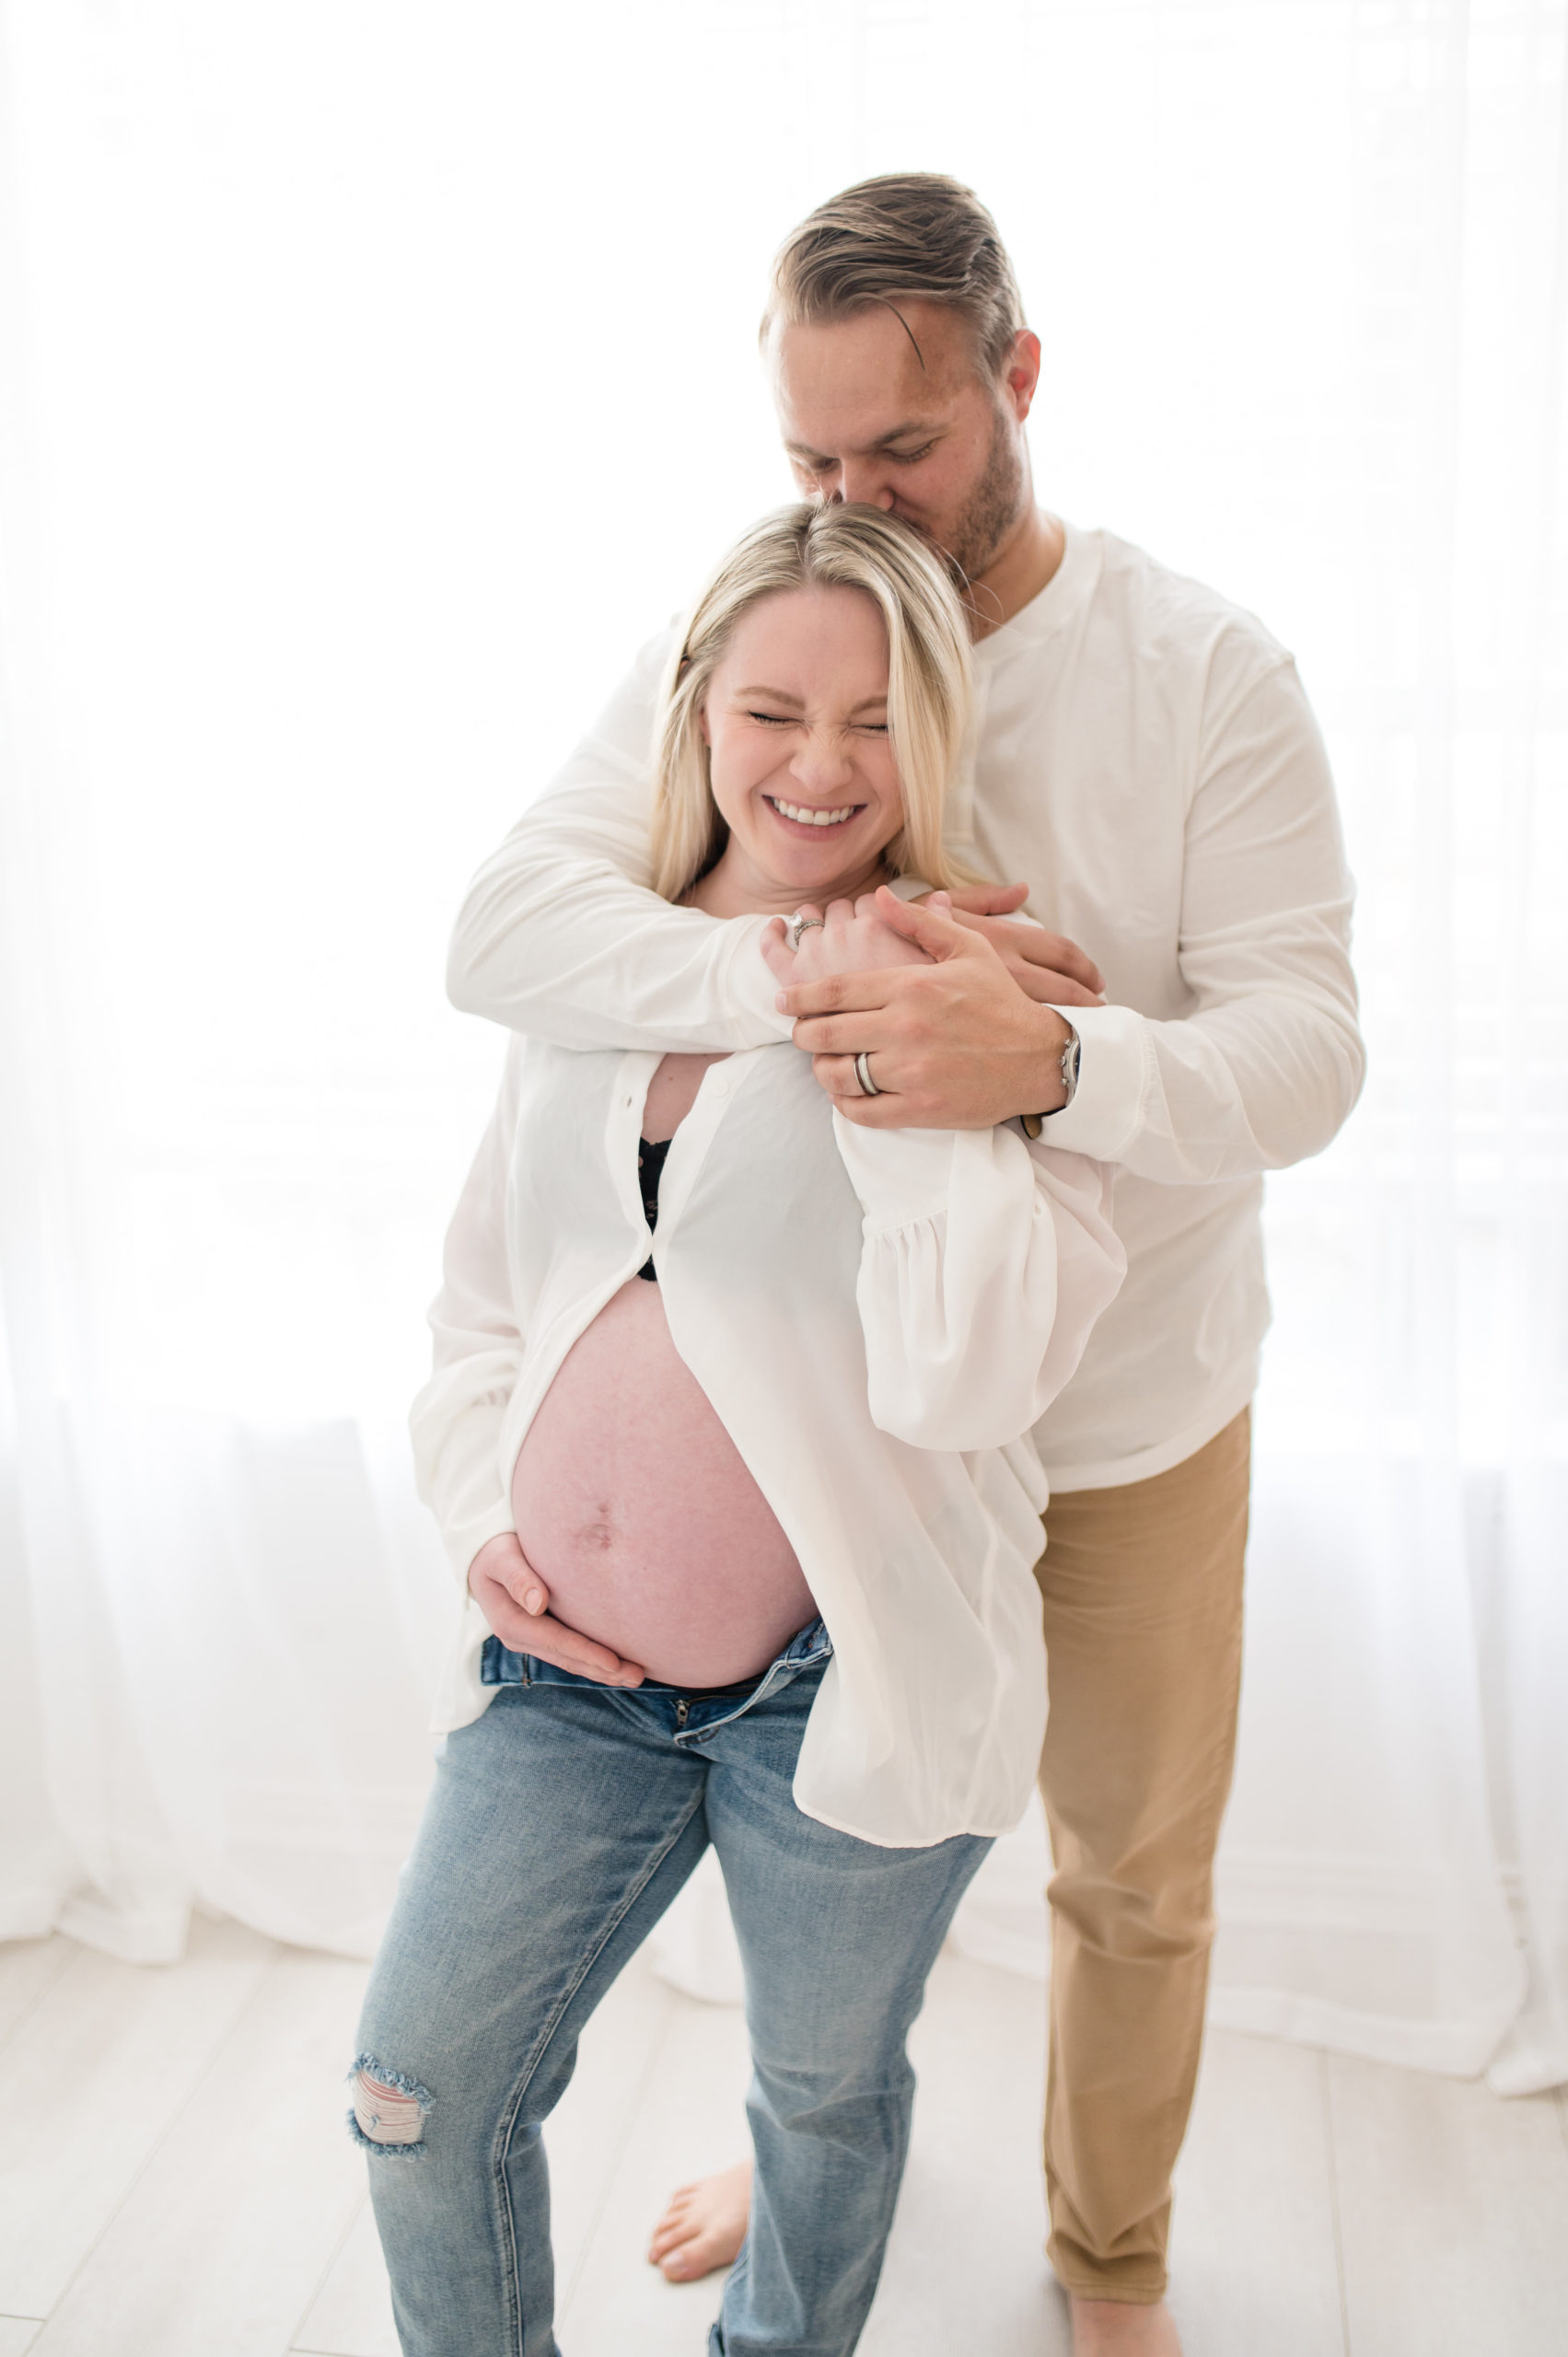 husband touches wife's pregnant belly while laughing photographed by Dallas newborn photographer, Lindsey Dutton Photography